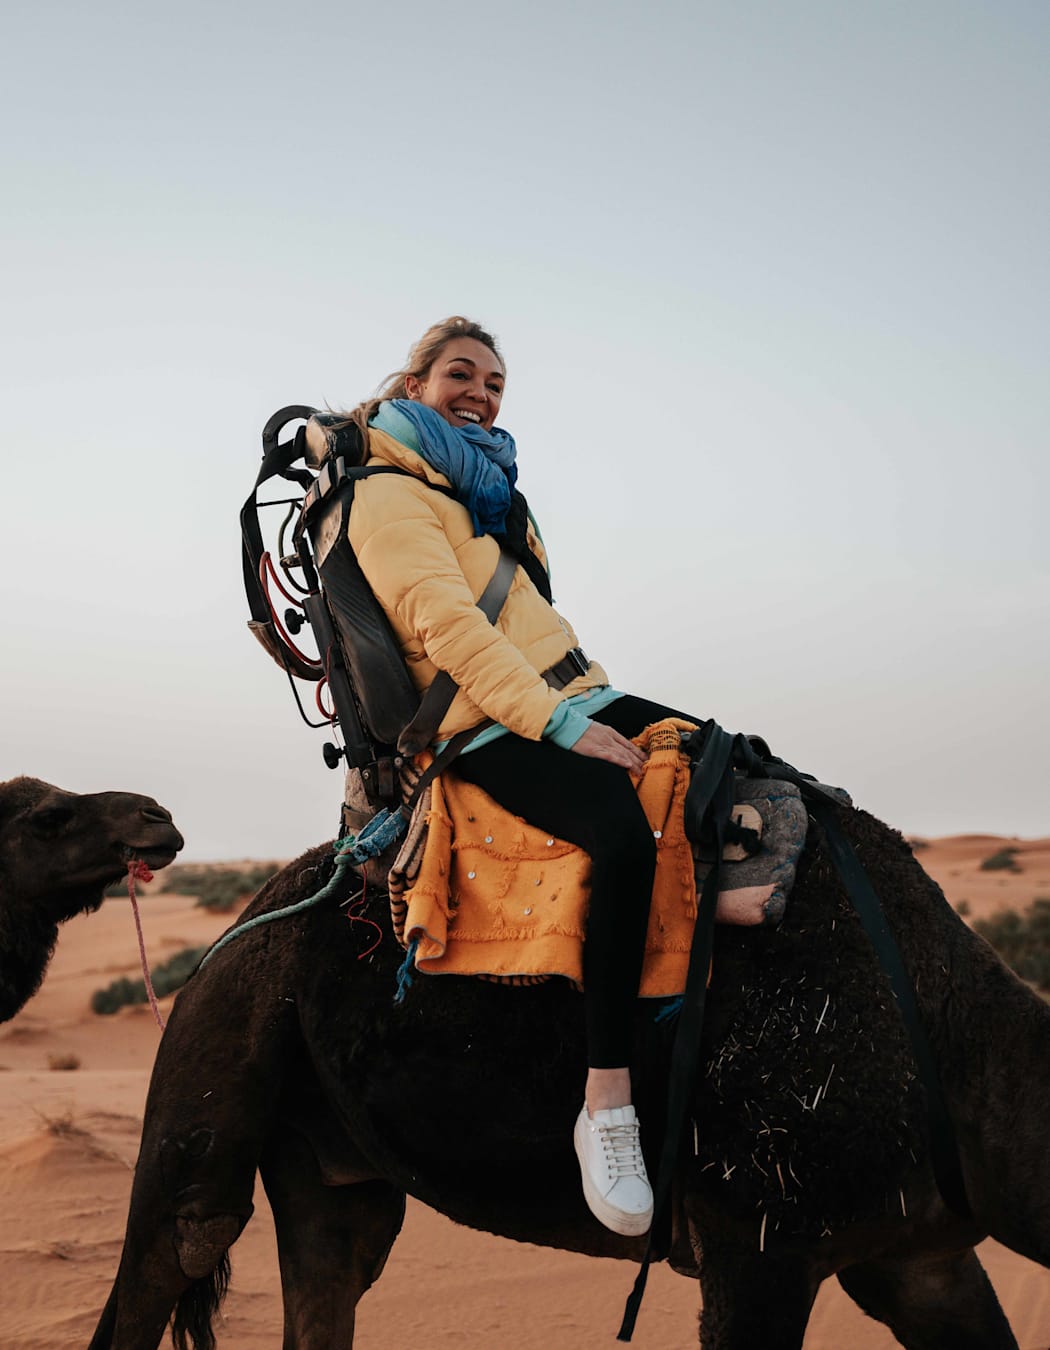 A woman in a yellow puffer jacket and blue scarf smiles as she rides a camel in the desert.